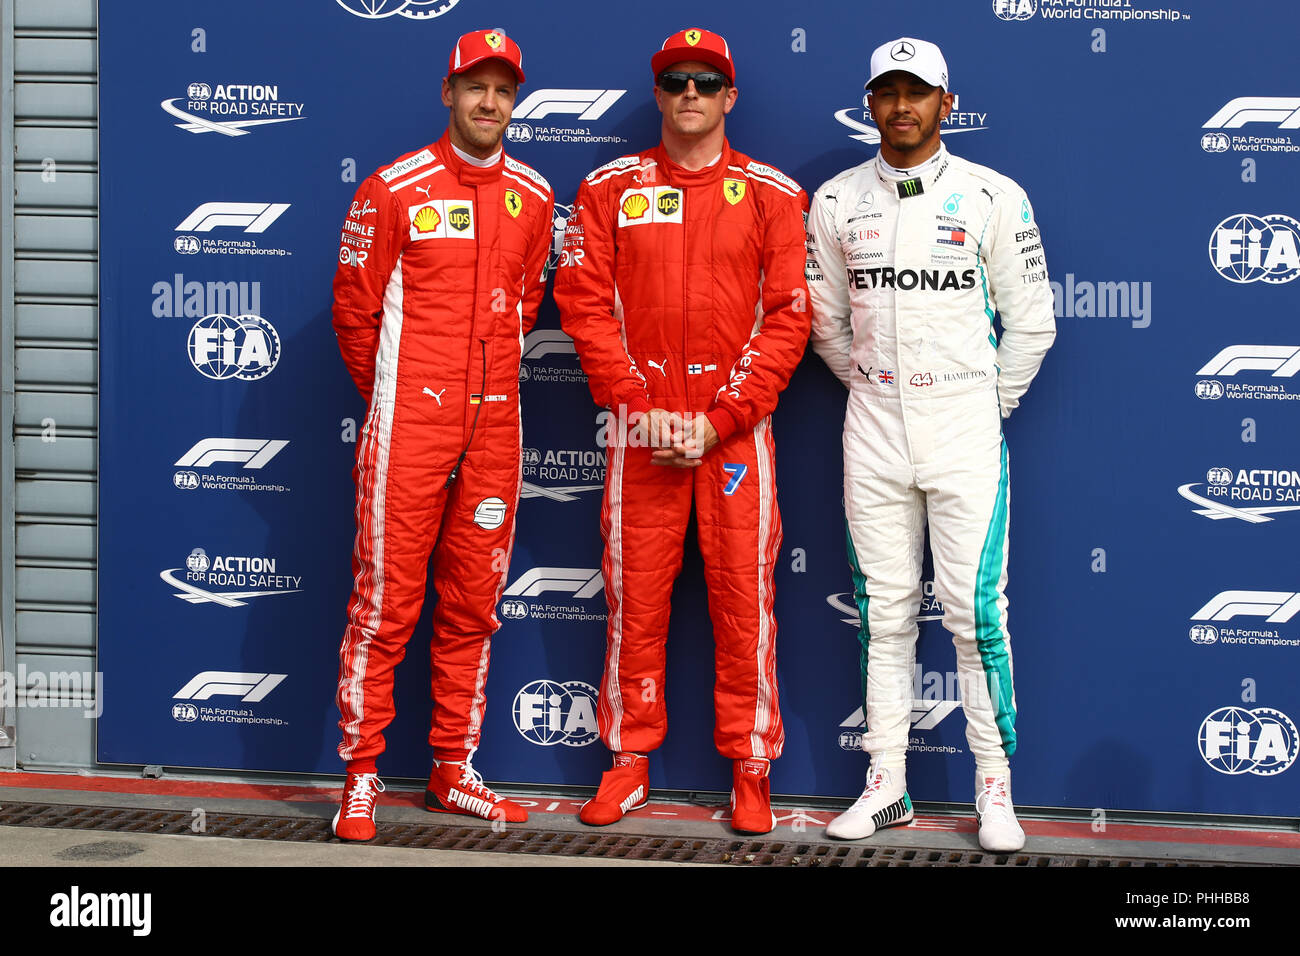 Monza, Italy. 1th September, 2018. Ferrari's Finnish driver Kimi Raikkonen (C) celebrates winning the pole position next to second placed Ferrari's German driver Sebastian Vettel (L) and third placed Mercedes' British driver Lewis Hamilton (R) after the qualifying session of the Formula One Grand Prix of Italy Credit: Marco Canoniero/Alamy Live News Stock Photo